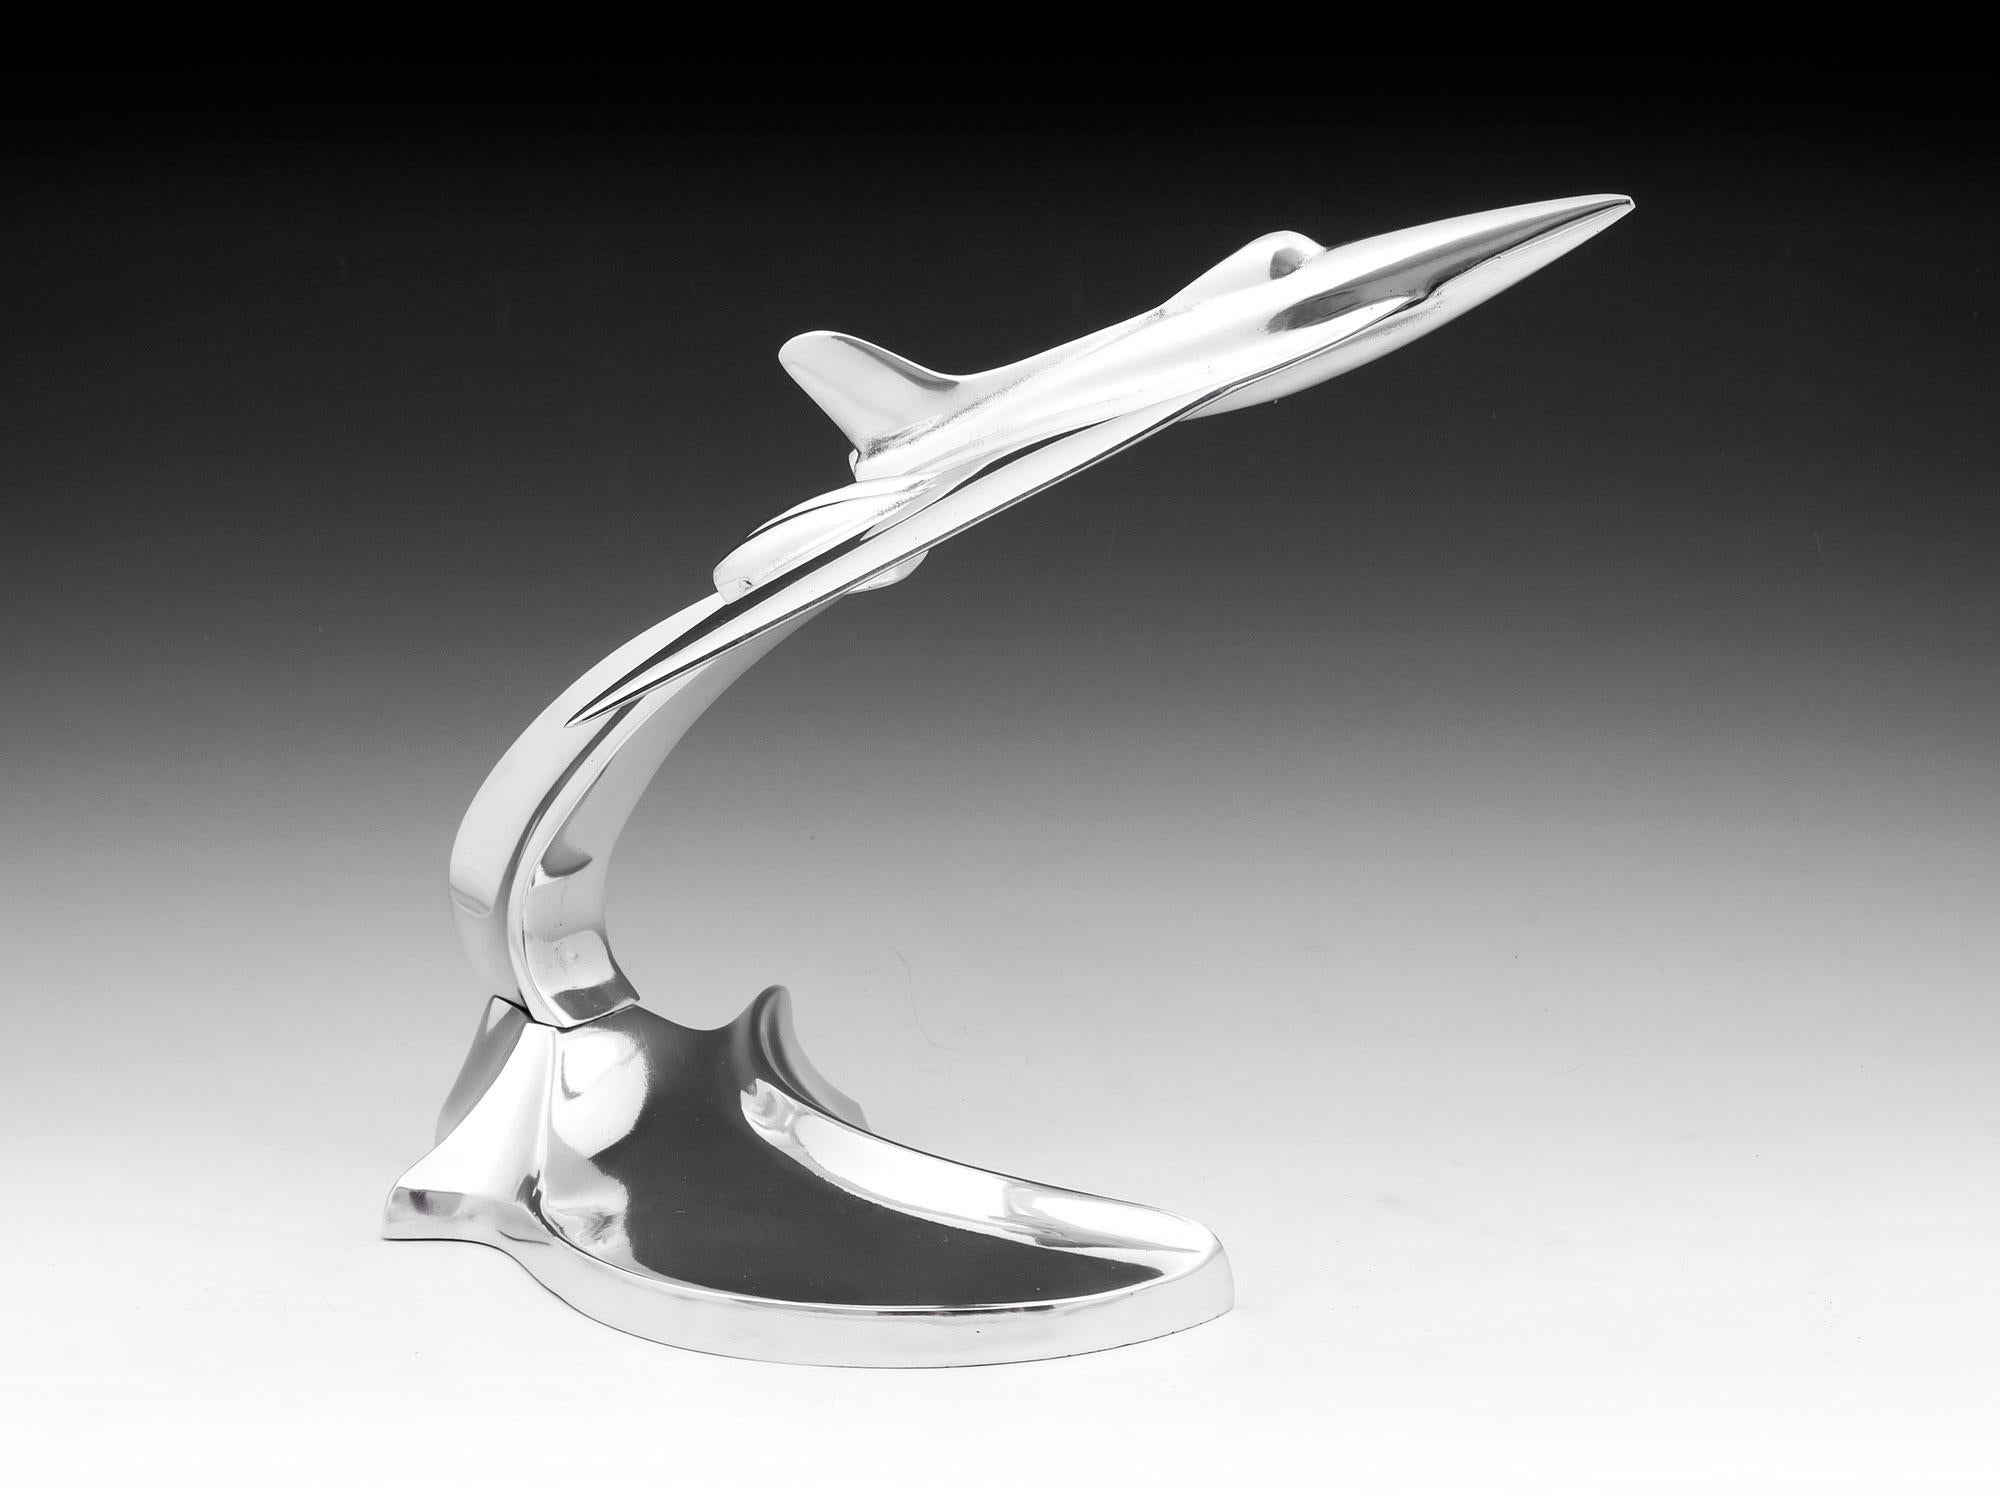 Stylised Aluminium RAF Avro Vulcan Bomber on Stand, super example for any RAF or Jet Bomber enthusiast who'd like to have them selves a piece of iconic history adorning a desk, shelf or office. 

The Avro Vulcan is a jet-powered tailless delta